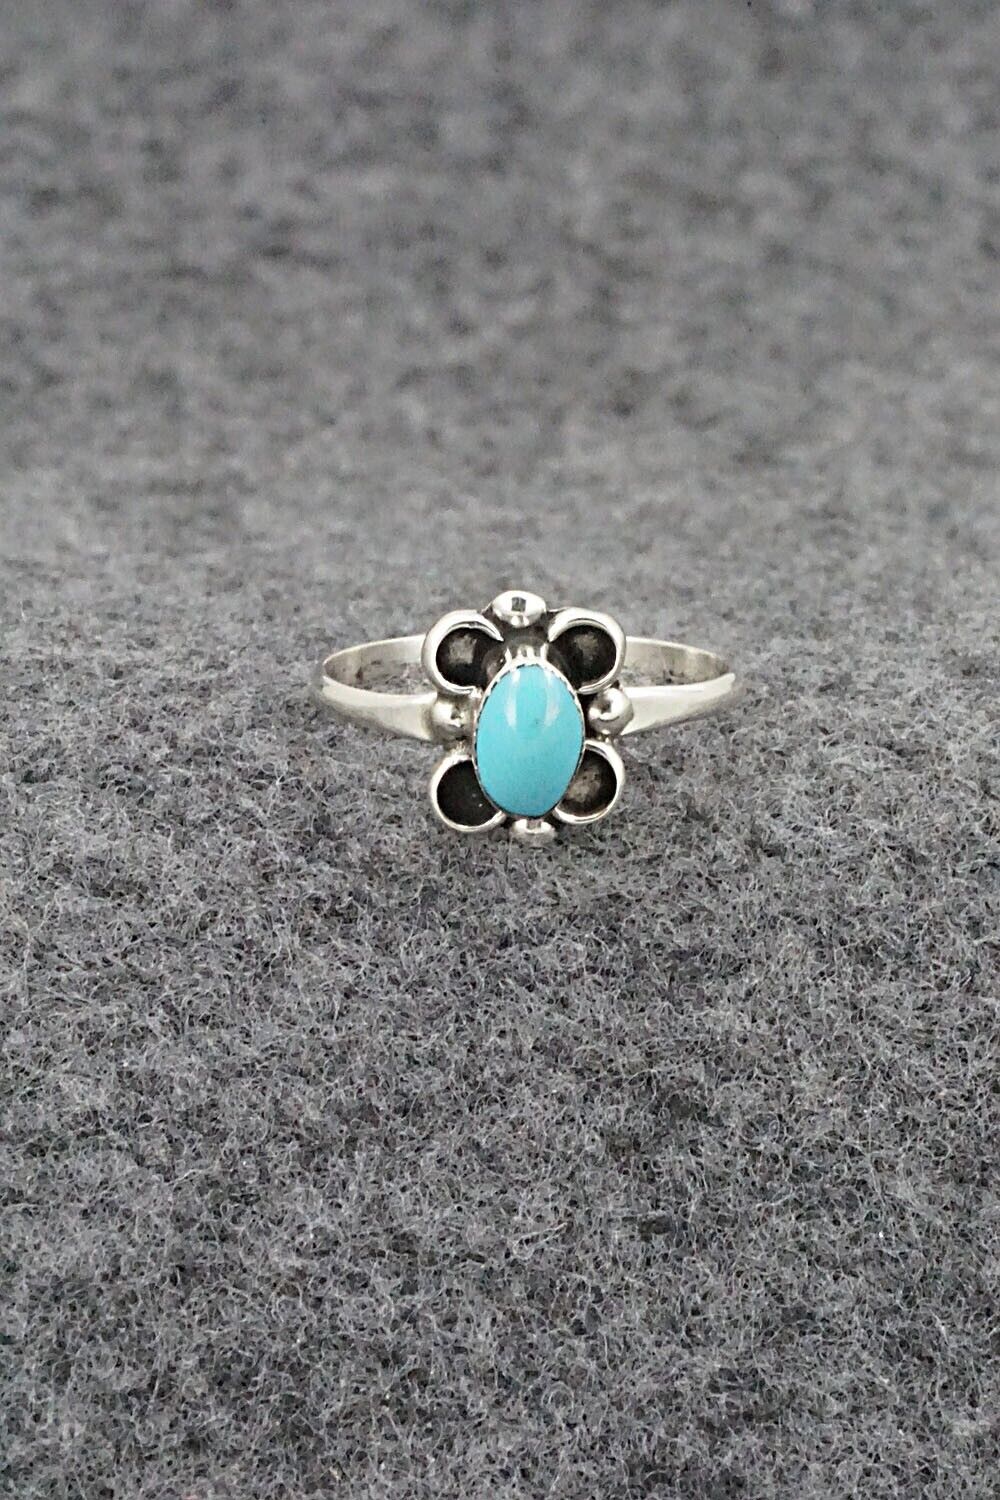 Turquoise & Sterling Silver Ring - Cora Cachini - Size 5